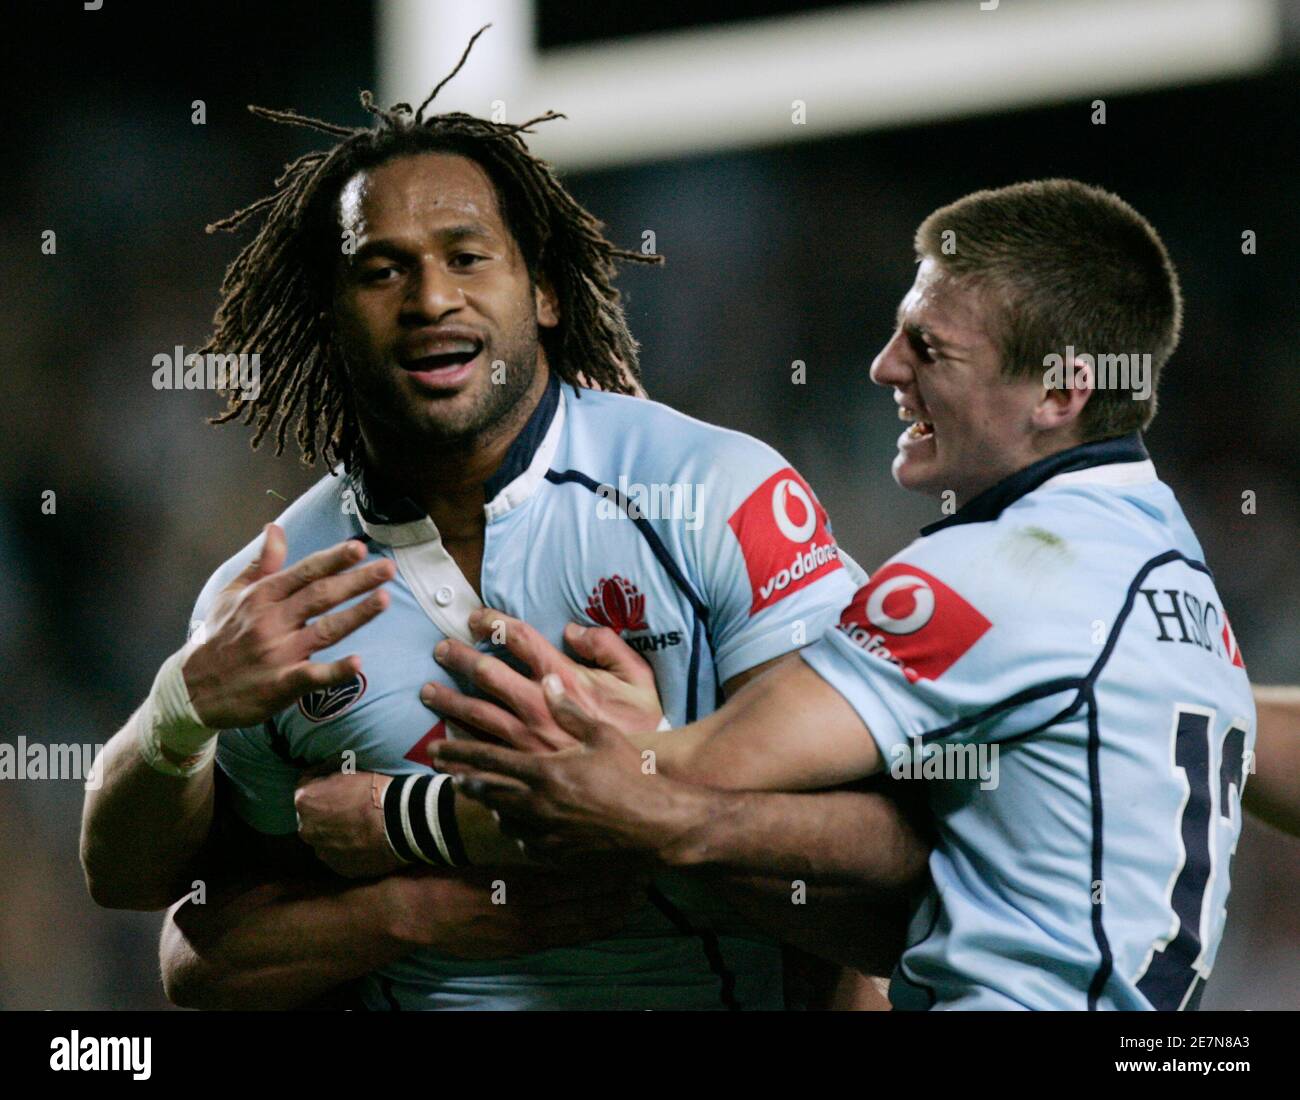 Lote Tuqiri (L) of the Waratahs from Australia is joined by teammate Rob Horne after scoring against the Sharks from South Africa during their Super 14 semi-final rugby match in Sydney May 24, 2008. REUTERS/Will Burgess    (AUSTRALIA) Stock Photo